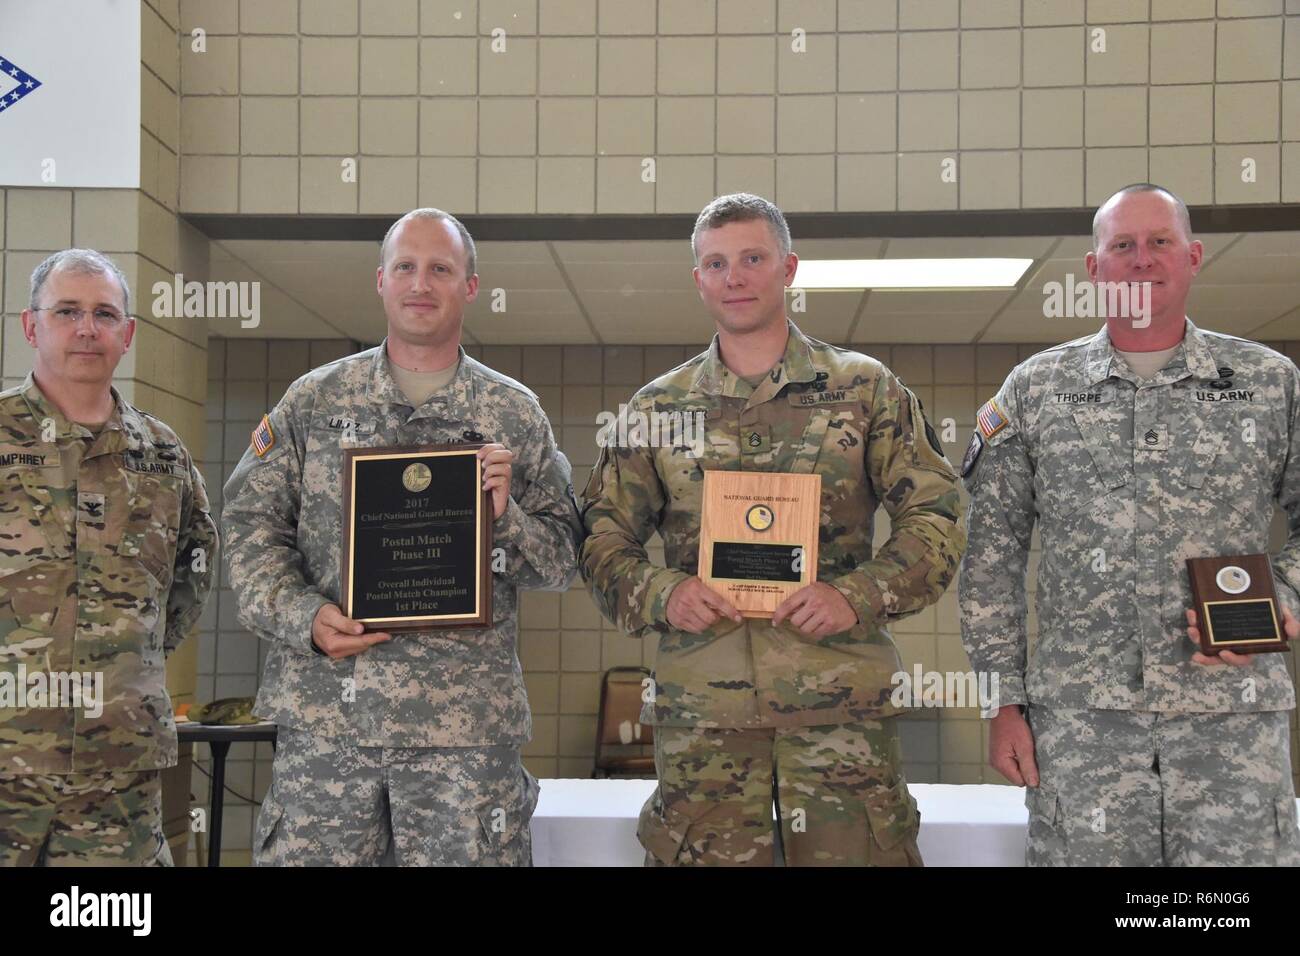 With a combined score of 2525-31X, 2nd Lt. Jonathan Lintz with the Nebraska National Guard achieved 1st place, Staff Sgt. Micah Fulmer with Colorado National Guard achieved 2nd place with a combined score of 2474-28X, and Sgt. 1st Class William Thorpe with Illinois National Guard with a combined score of 2460-28X achieved 3rd place. They are presented with CNGB Overall Championship Plaques by Col. Dennis Humphrey, National Guard Marksmanship Training Center Commander, May 25, 2017 at the completion of the CNGB Postal Matches, hosted by the National Guard Marksmanship Training Center held at Ro Stock Photo